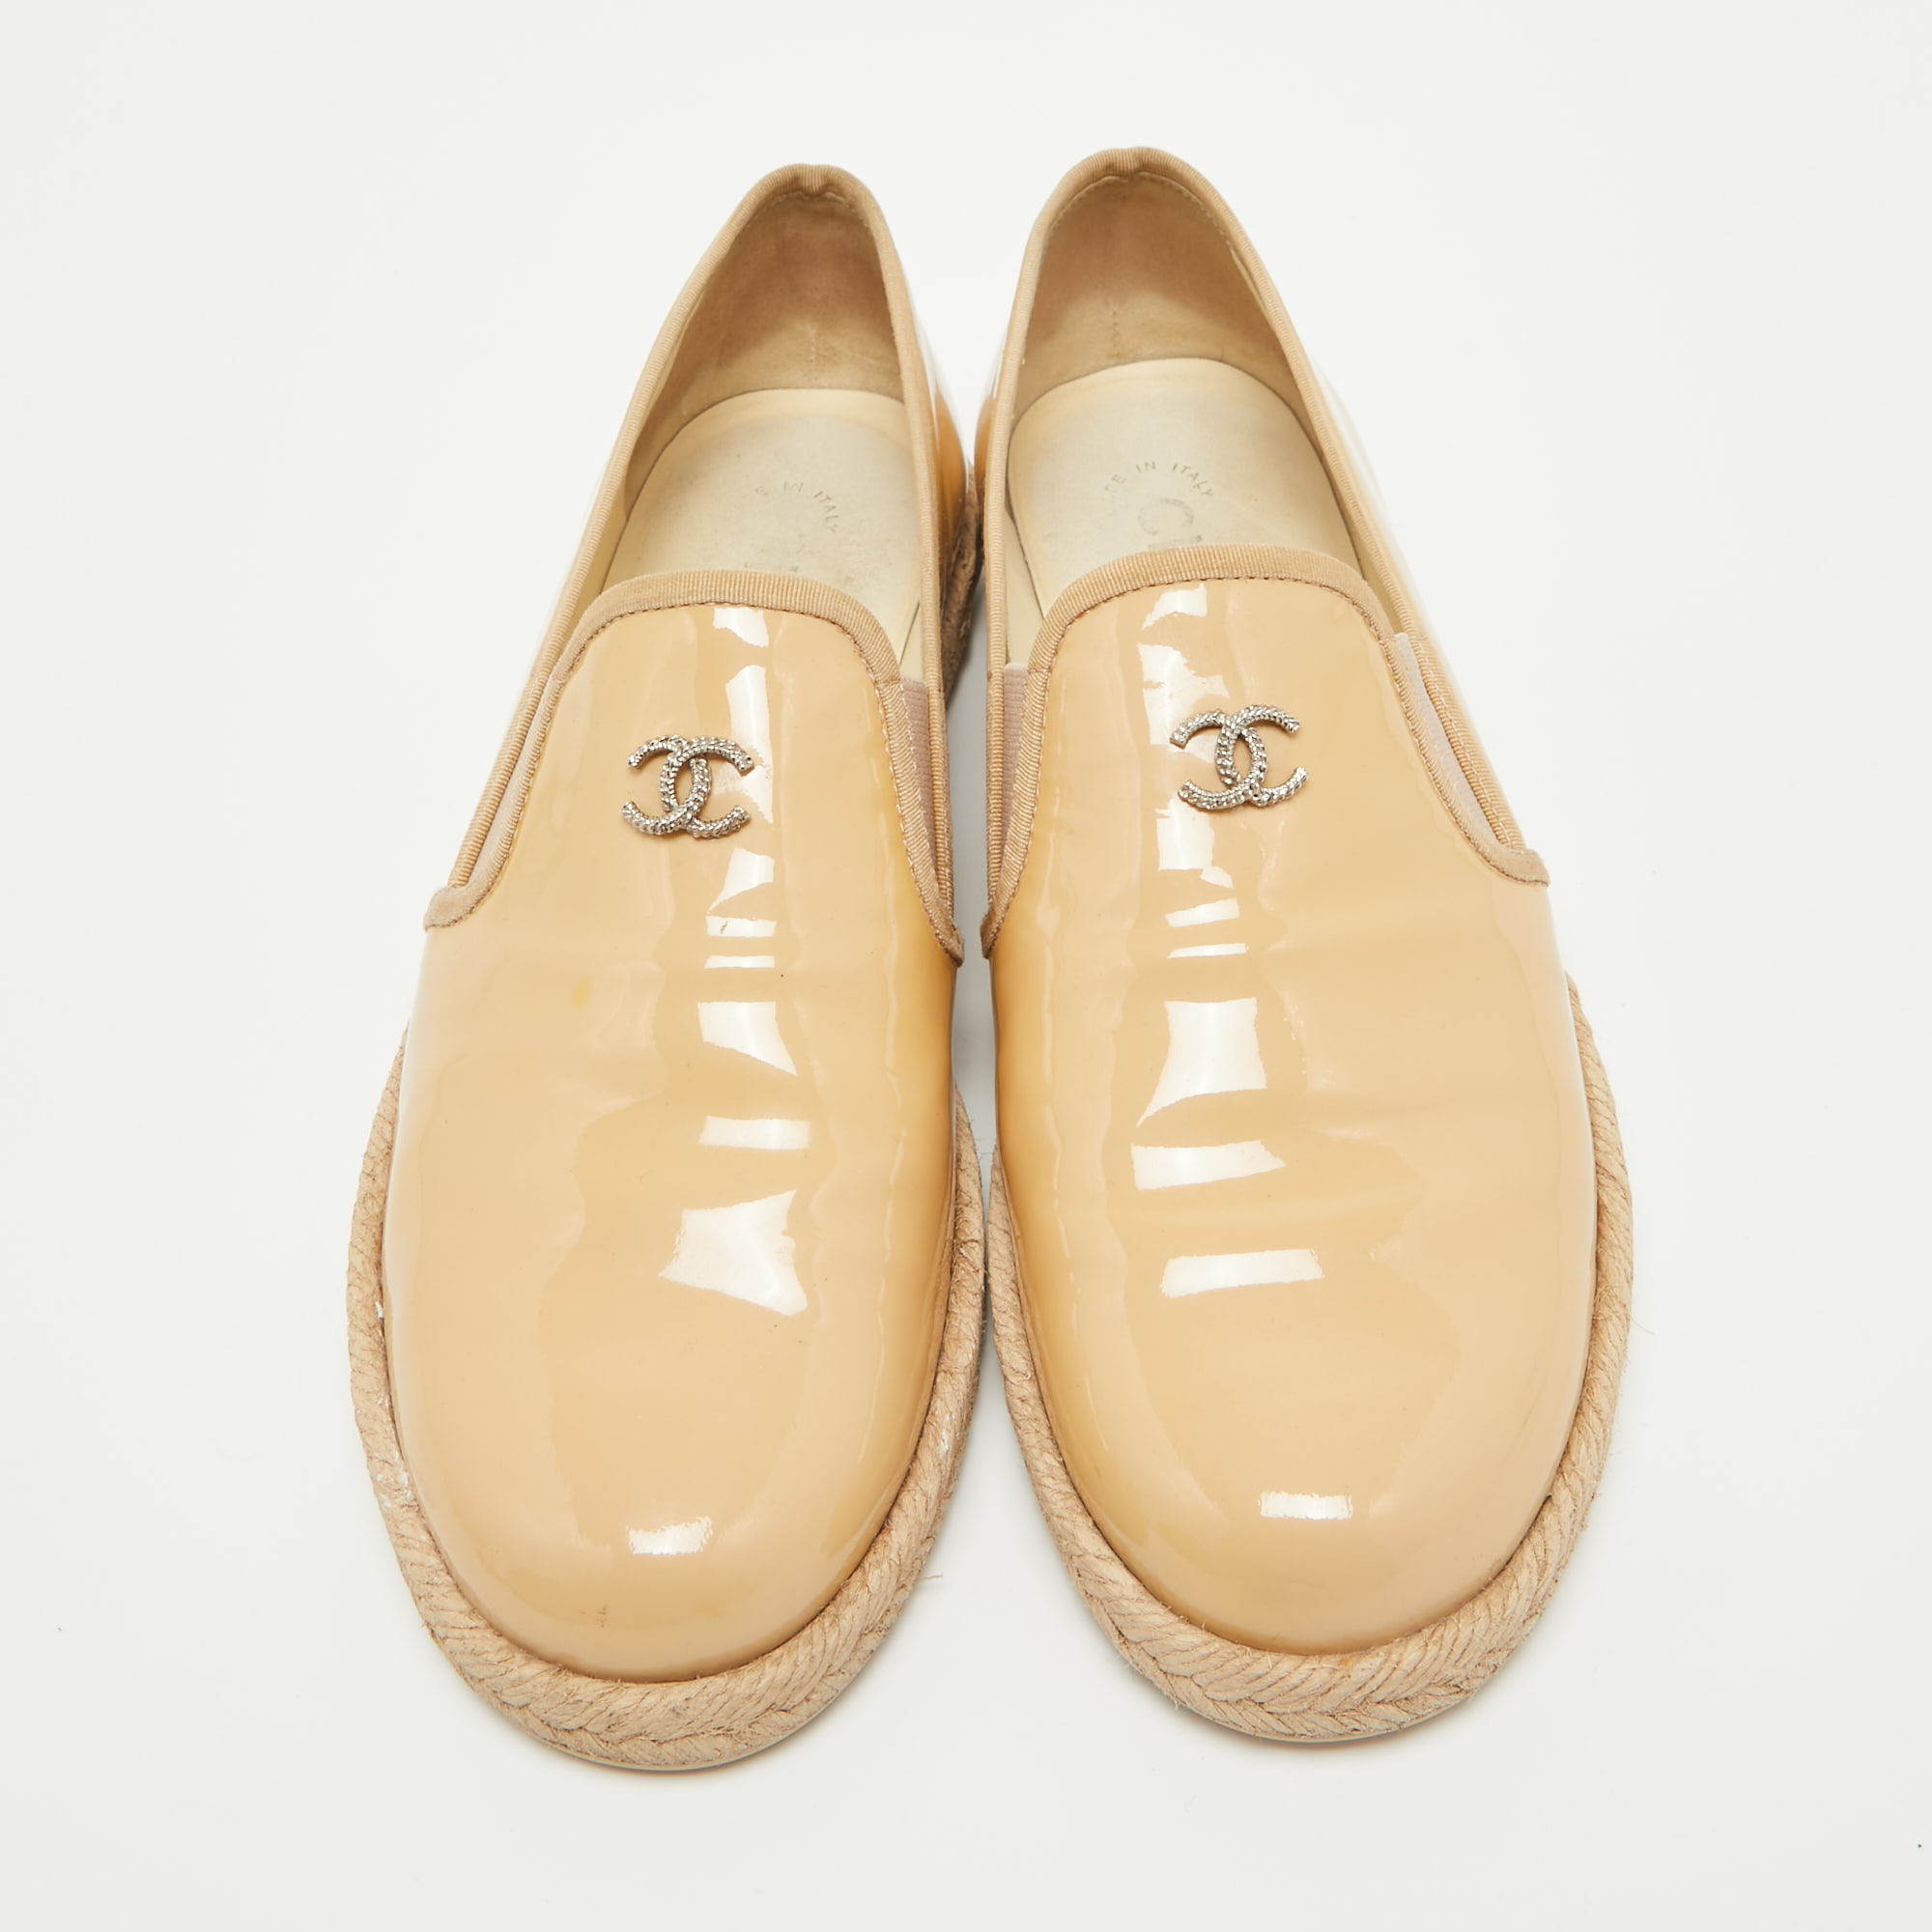 Chanel Beige Patent Leather CC Espadrille Loafers Size 36.5